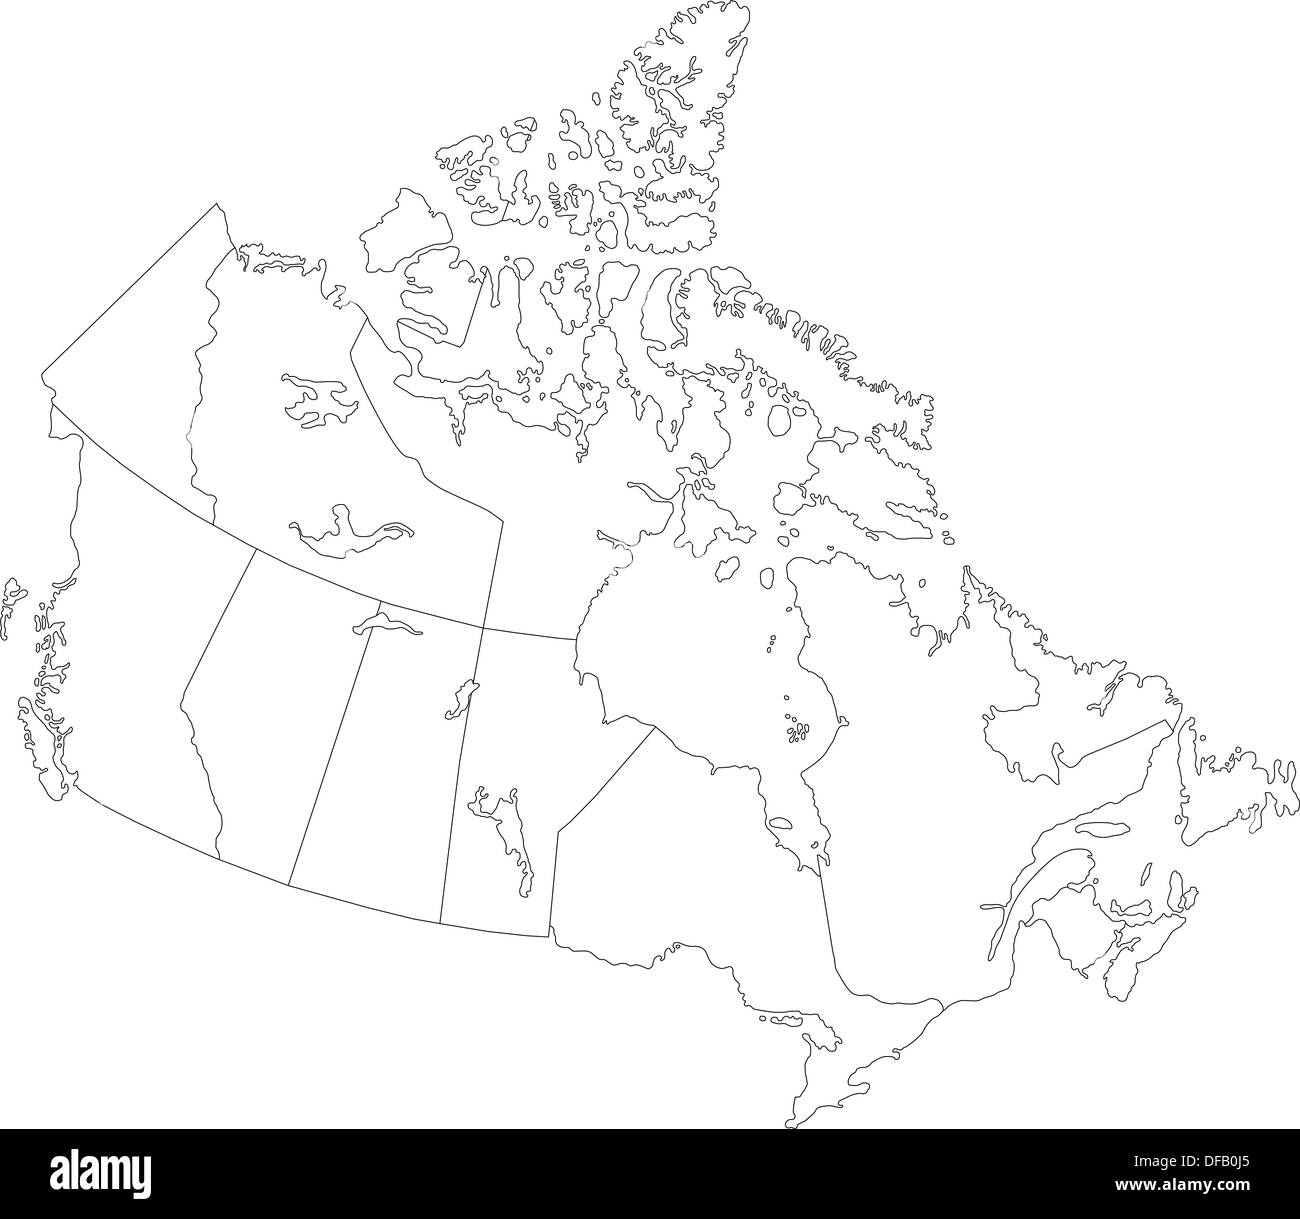 Outline Canada map Stock Photo